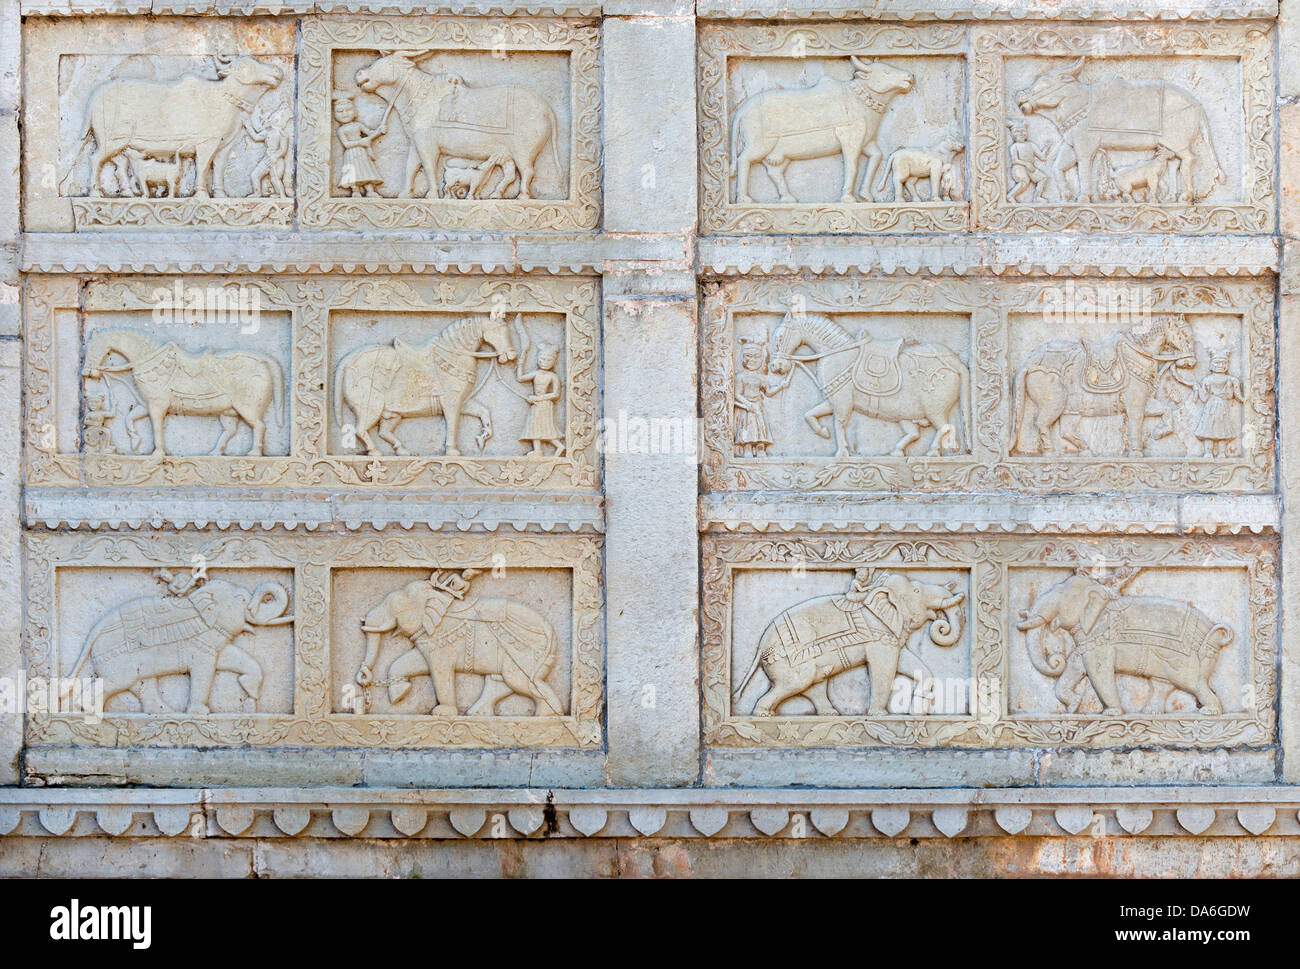 Reliefs of elephants, horses and cattle, 84-column cenotaph, grave monument or tomb Stock Photo